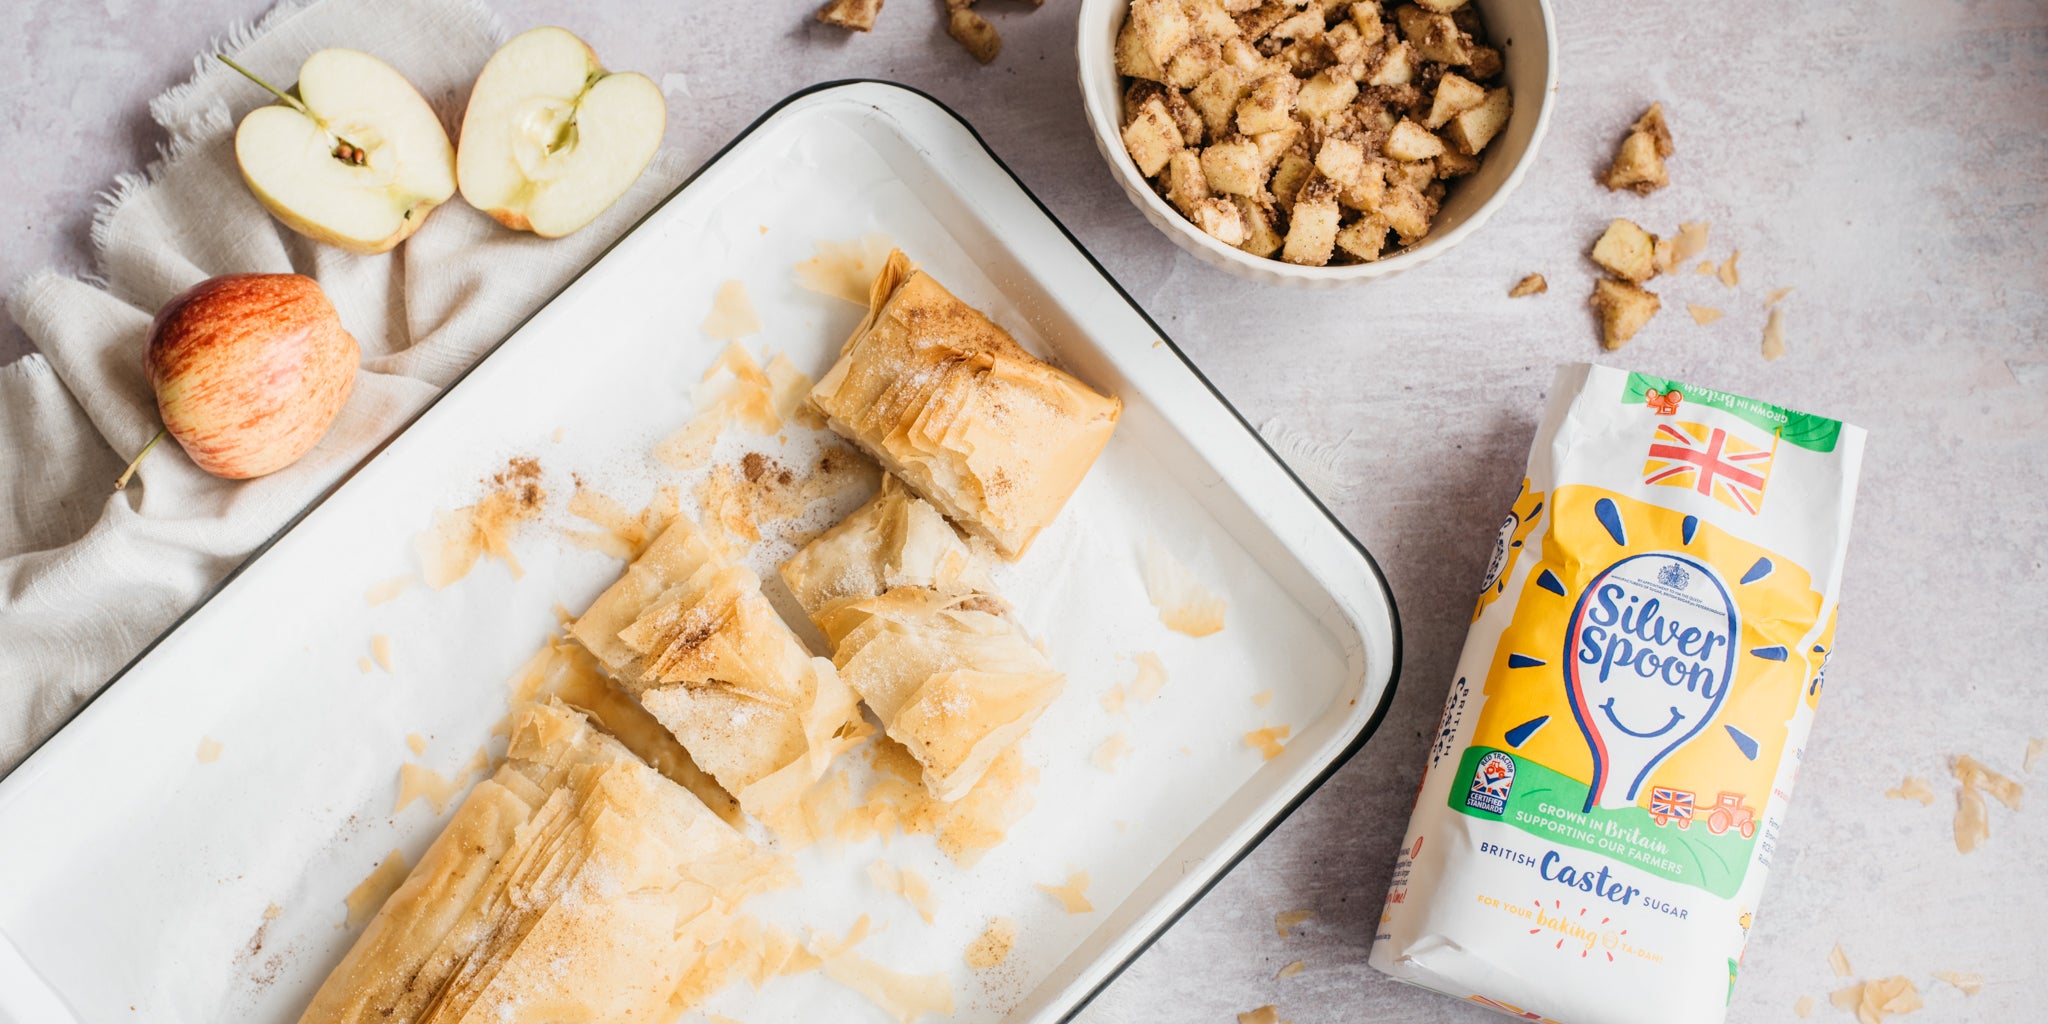 Apple strudel in baking tray surrounded by apples and pack of sugar